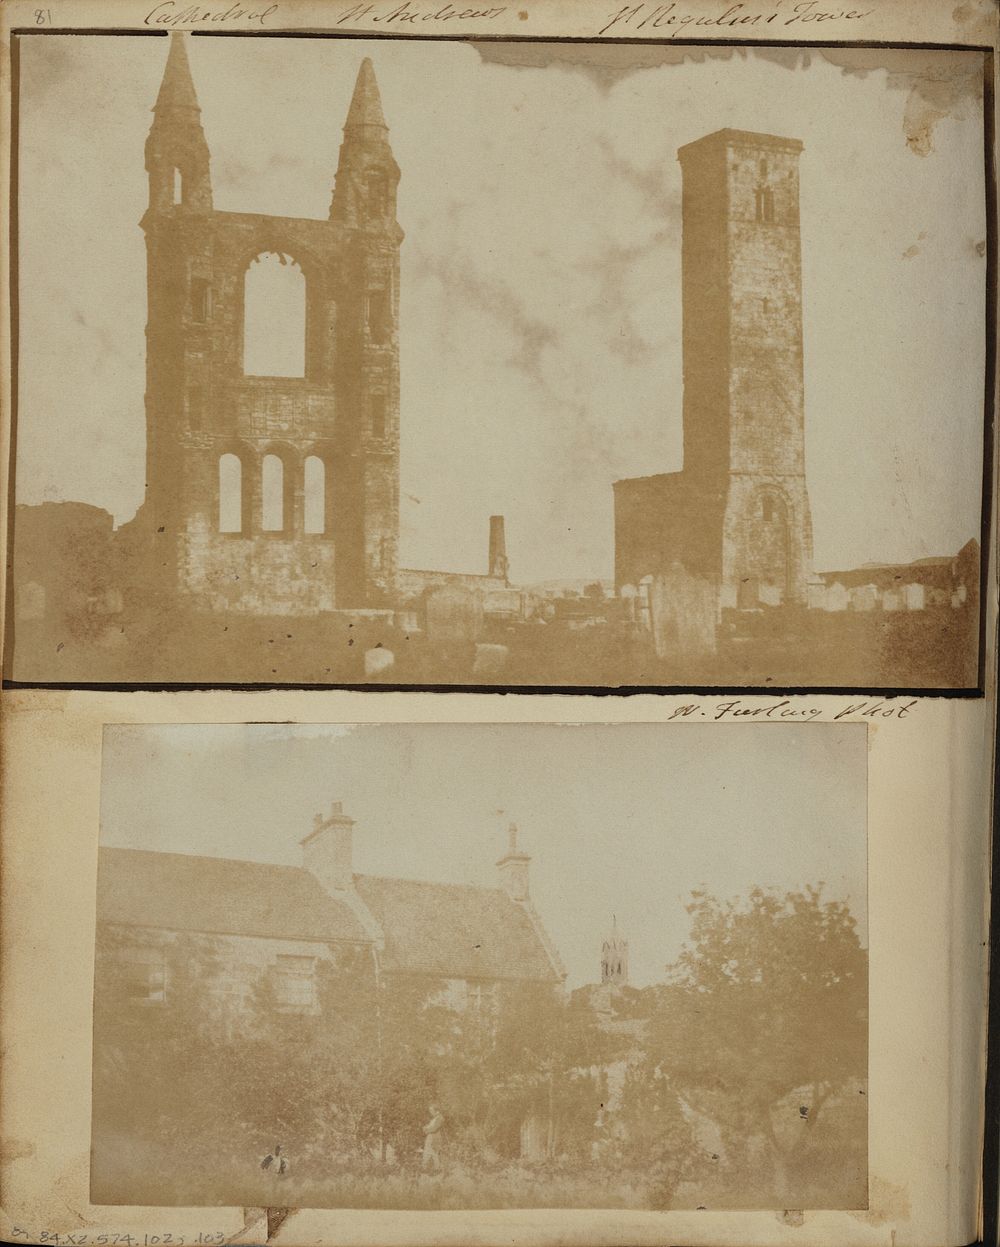 St. Regulus Tower and the East Gable of St. Andrews Cathedral from the Northwest by William Holland Furlong